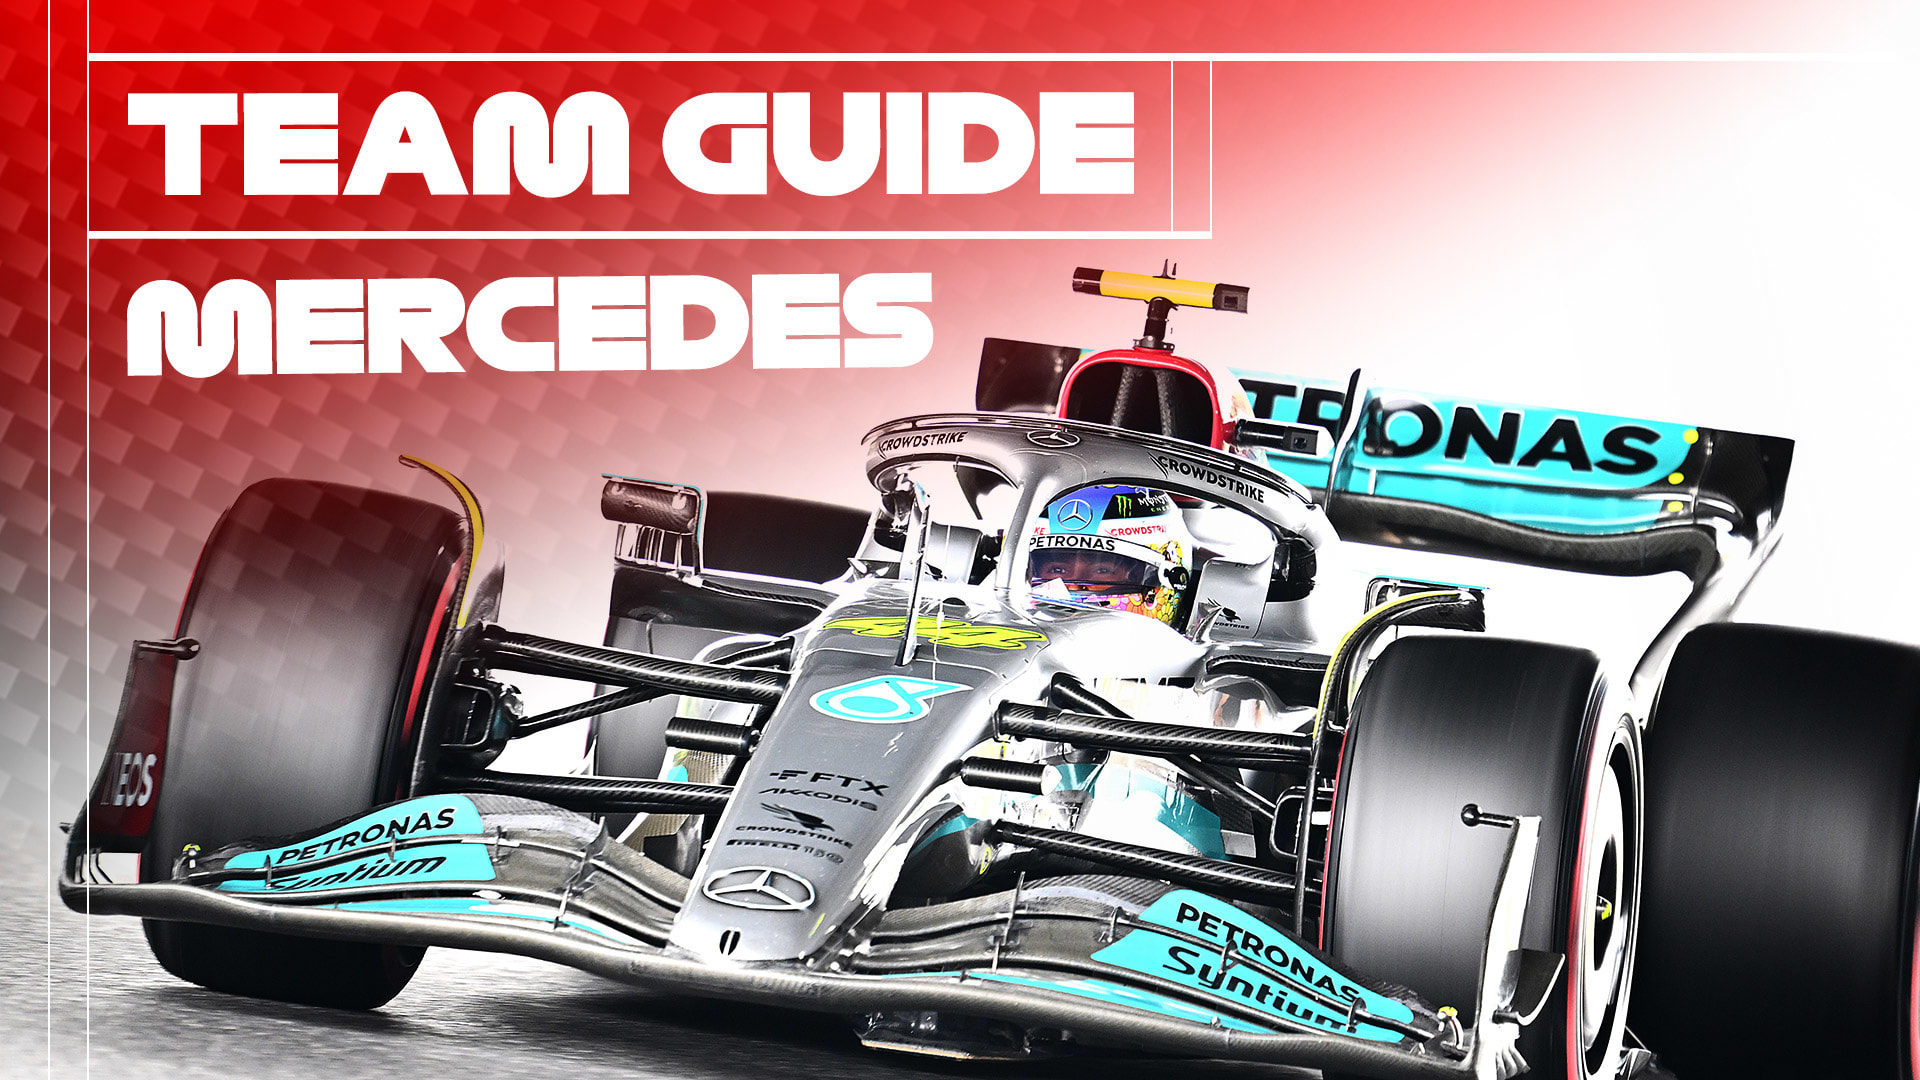 TEAM GUIDE: A look at Mercedes' amazing F1 success, their recent struggles  – and how they stack up for 2023 | Formula 1®